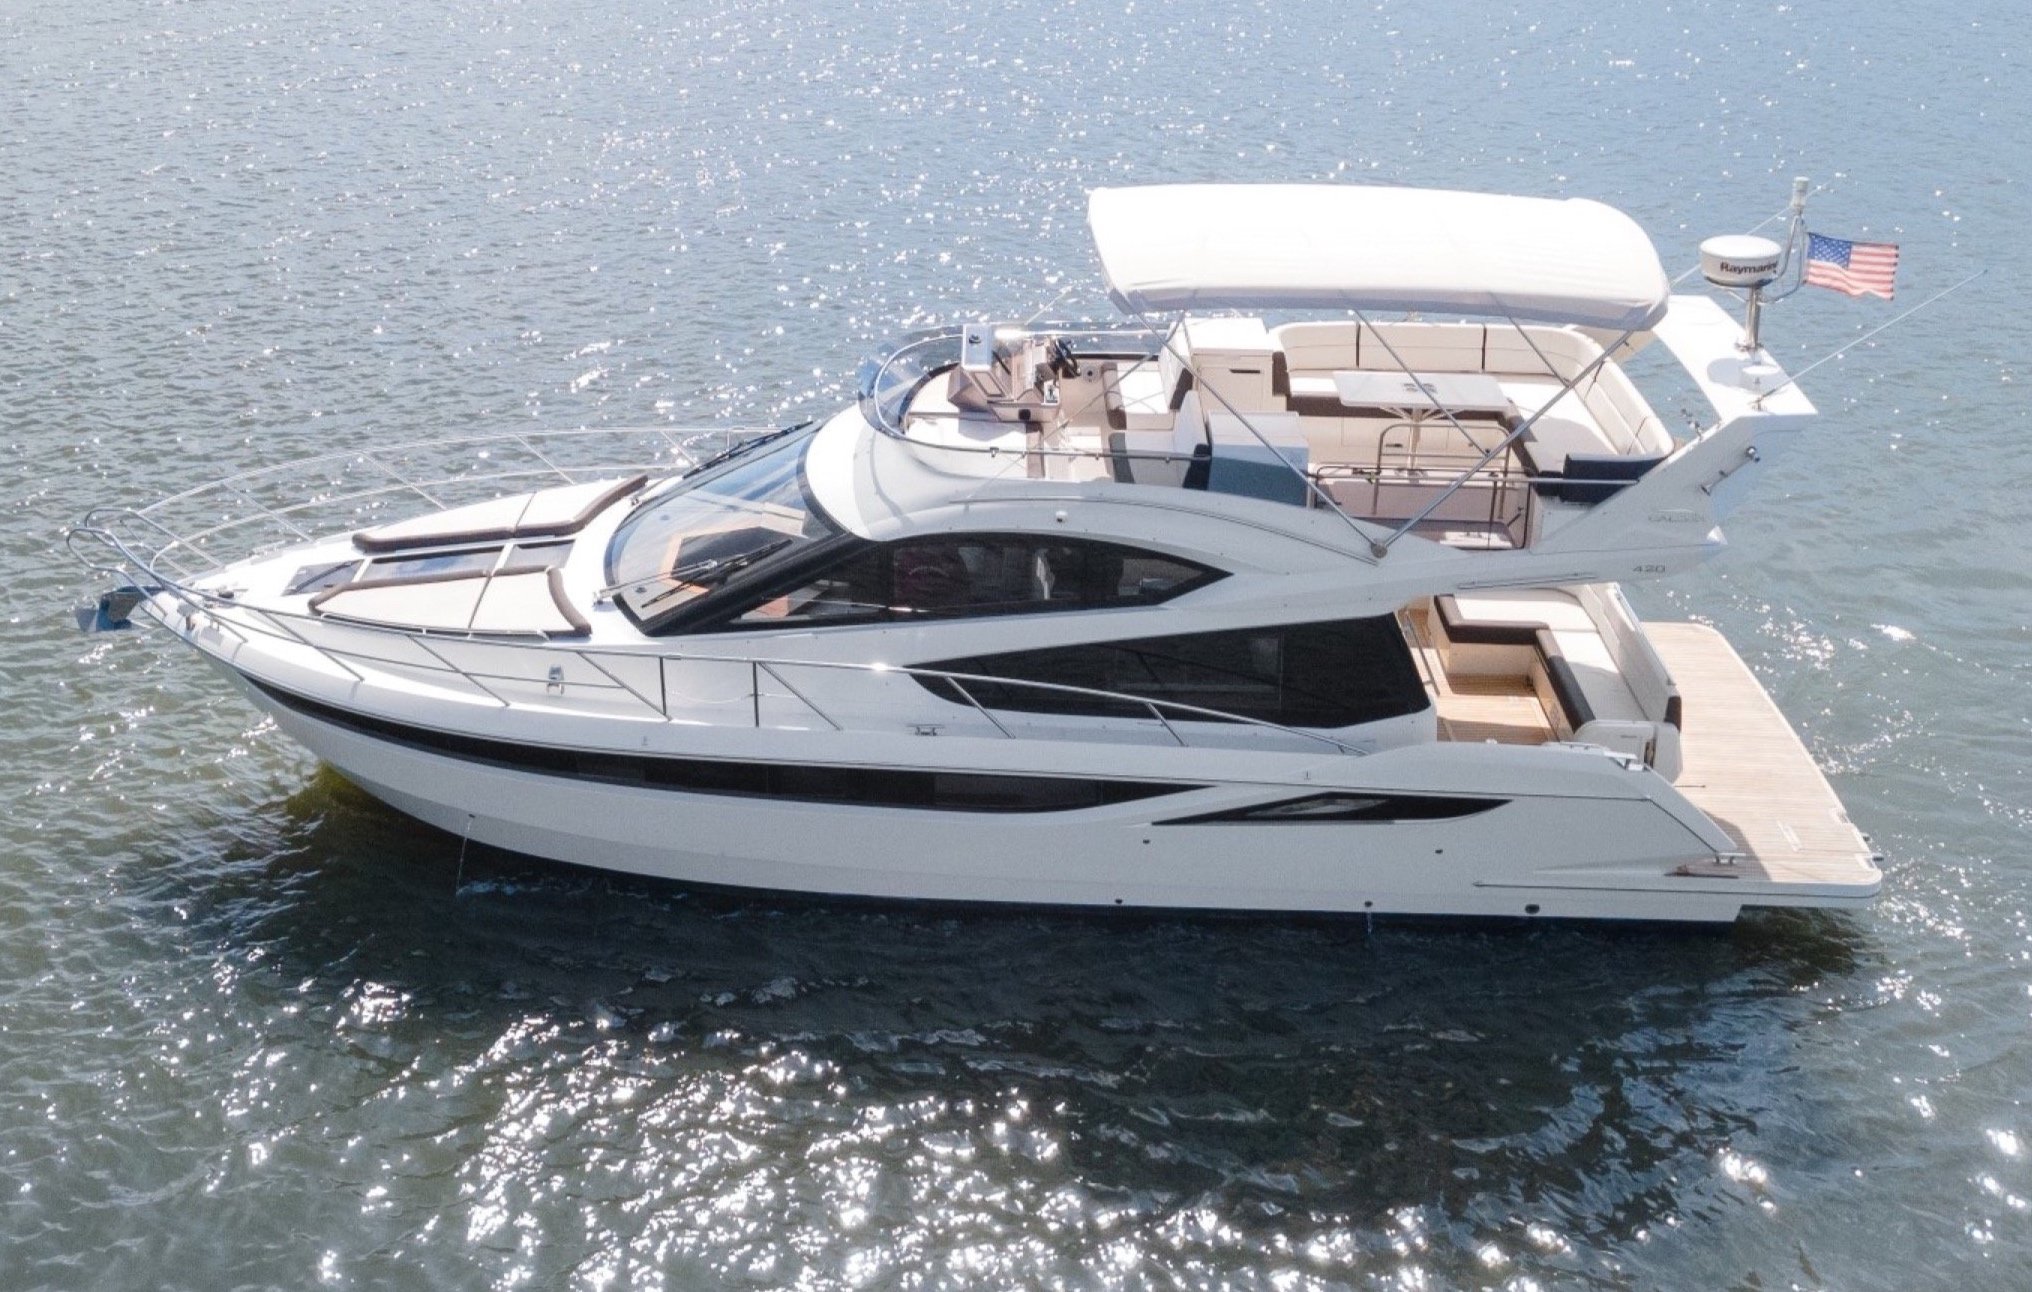 45 ft Galeon | From $2100 | 13 guest max